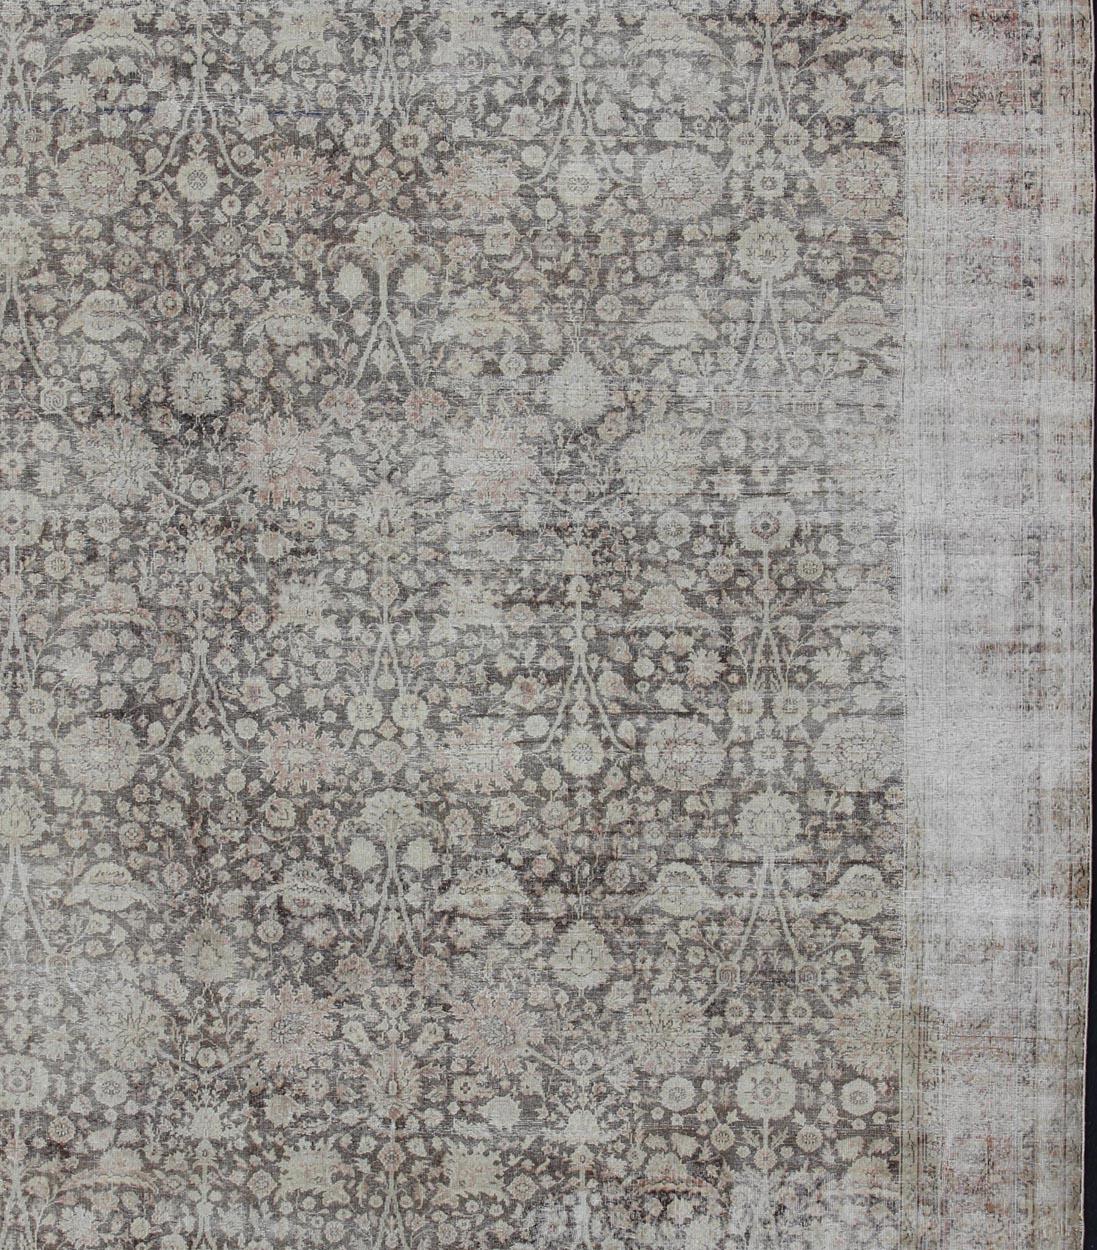 Floral Oushak carpet from Turkey. Antique Turkish Oushak Rug with All-Over Floral Design in Earth Tones. Keivan Woven Arts /  rug / DAN-KEI-1, country of origin / type: Turkey / Oushak, circa 1900
Measures: 11'6 x 14'7.
This Turkish Oushak rug